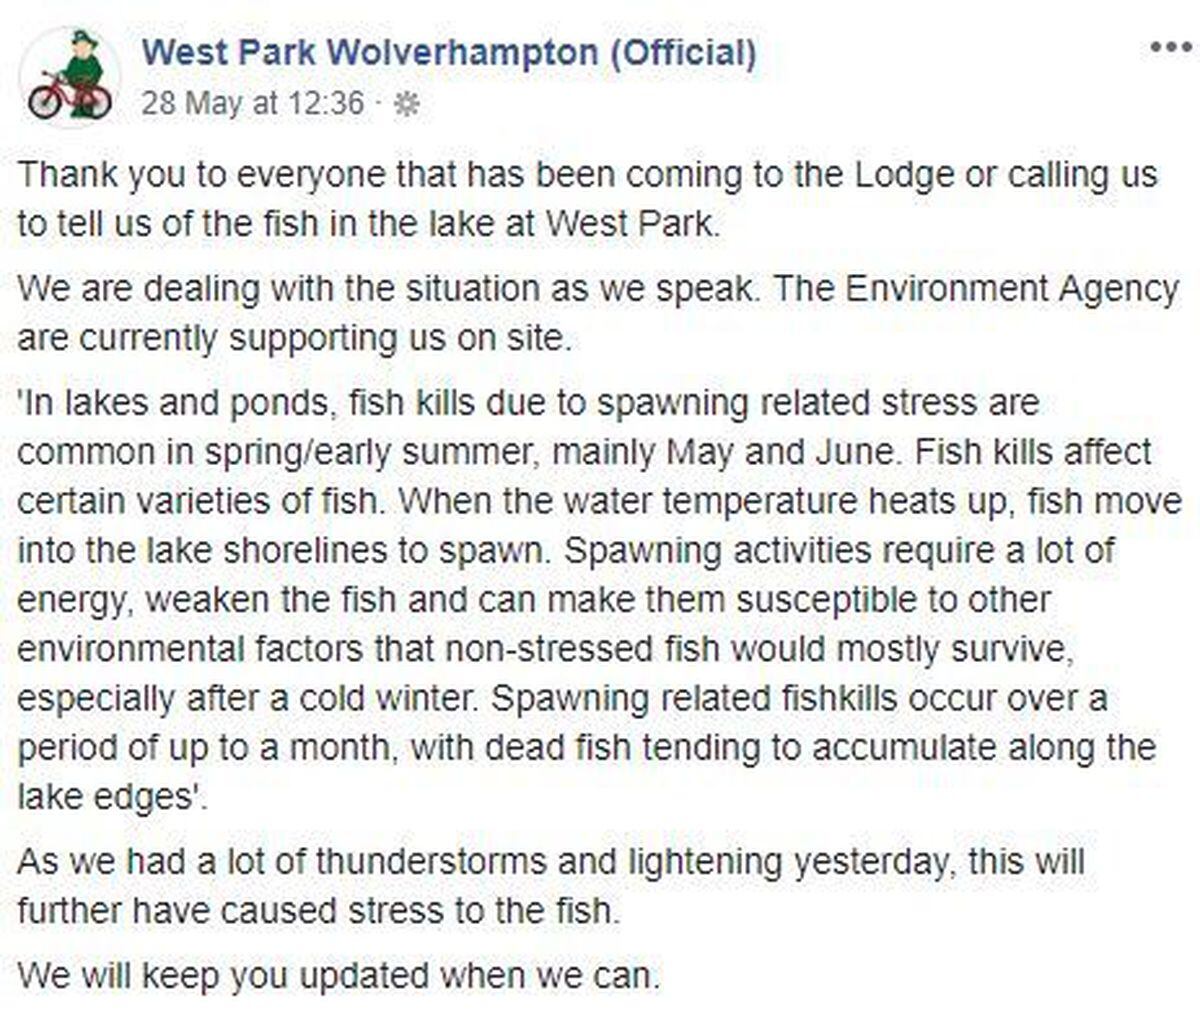 The post on the West Park Facebook page